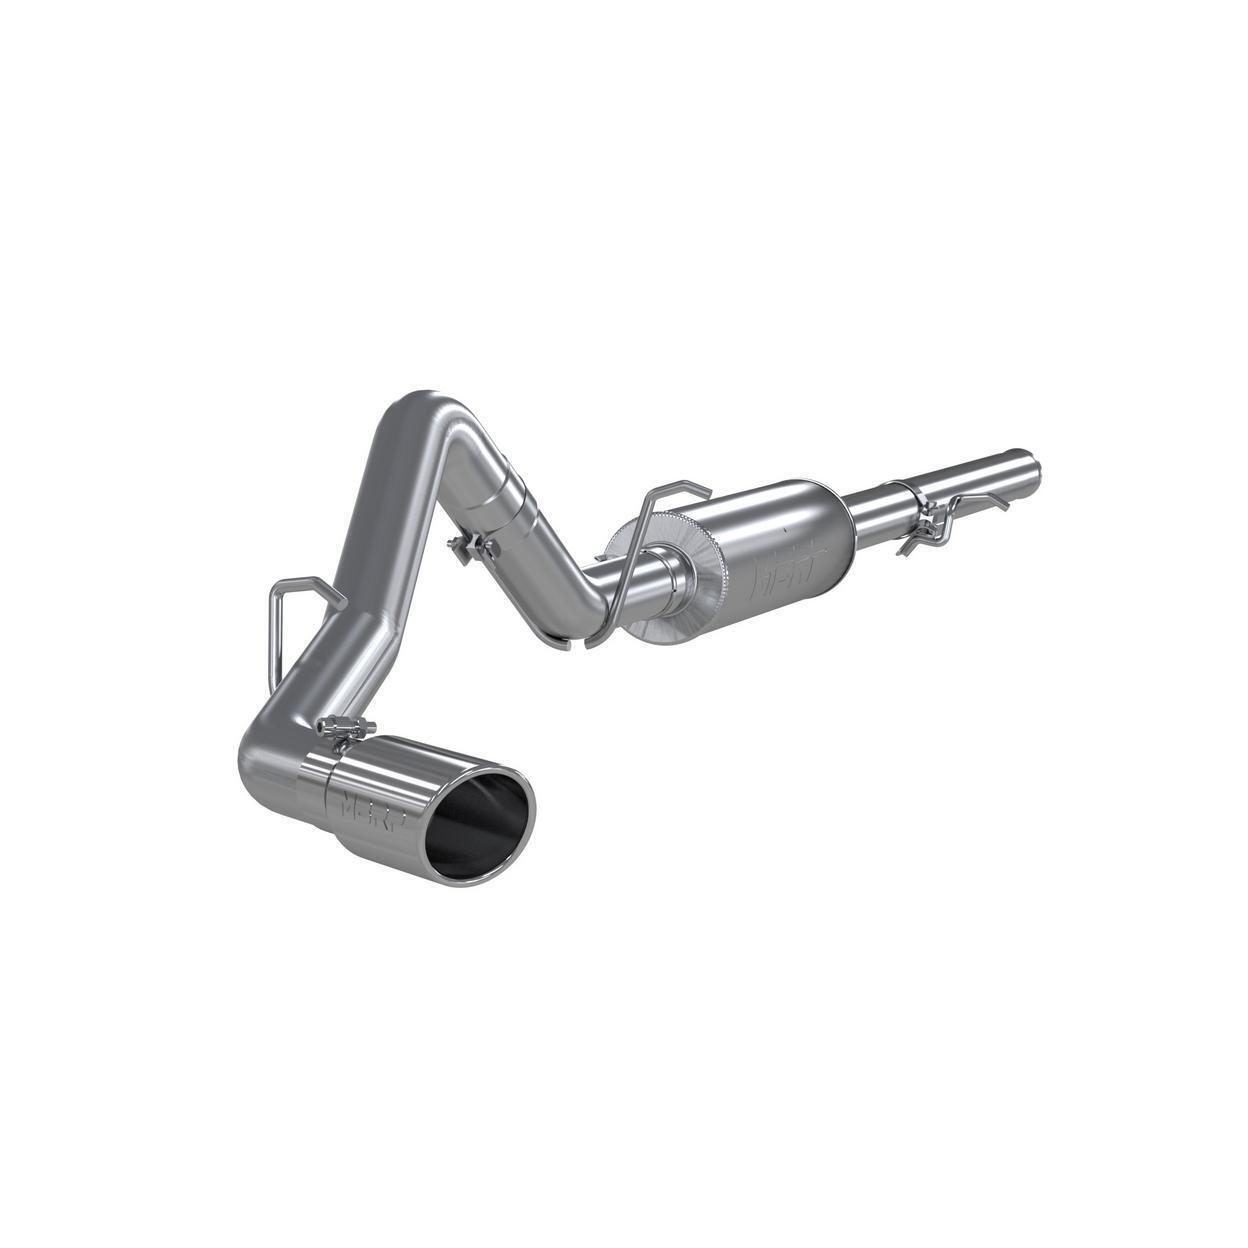 MBRP Exhaust S5054409-NX Exhaust System Kit for 2009 Chevrolet Silverado 1500